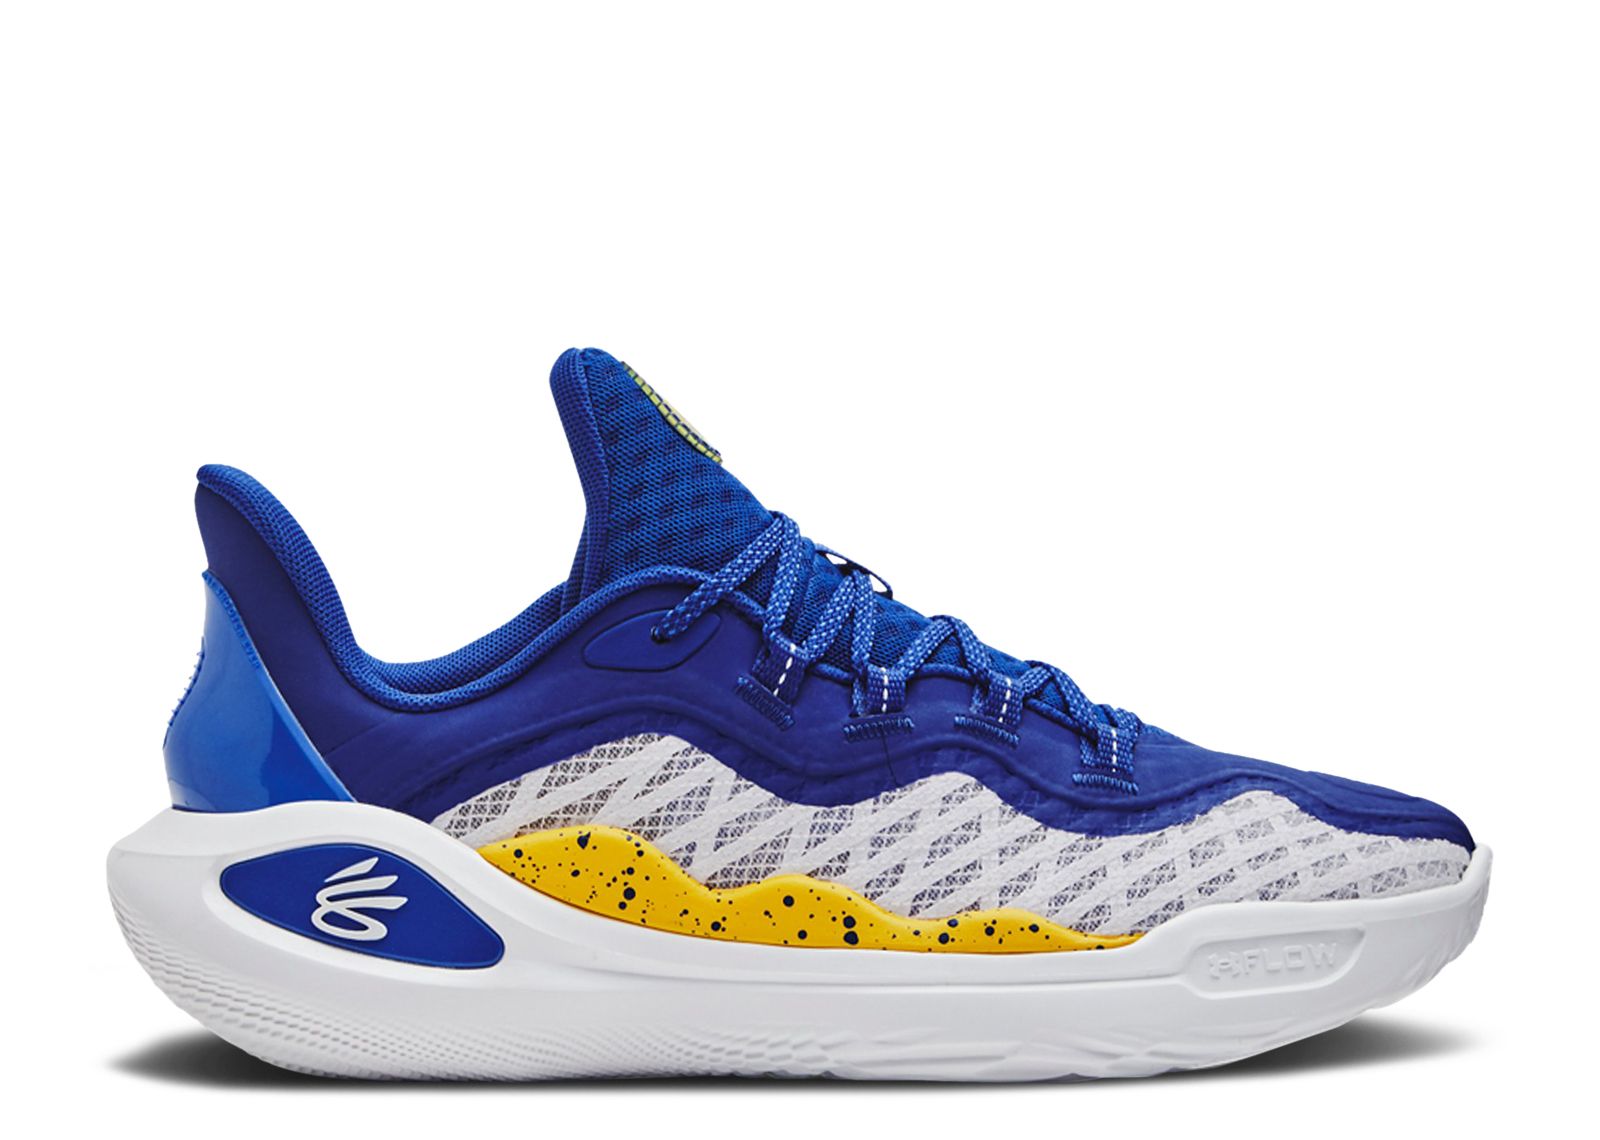 Curry Flow 11 'Dub Nation' - Curry Brand - 3026615 100 - white/royal ...